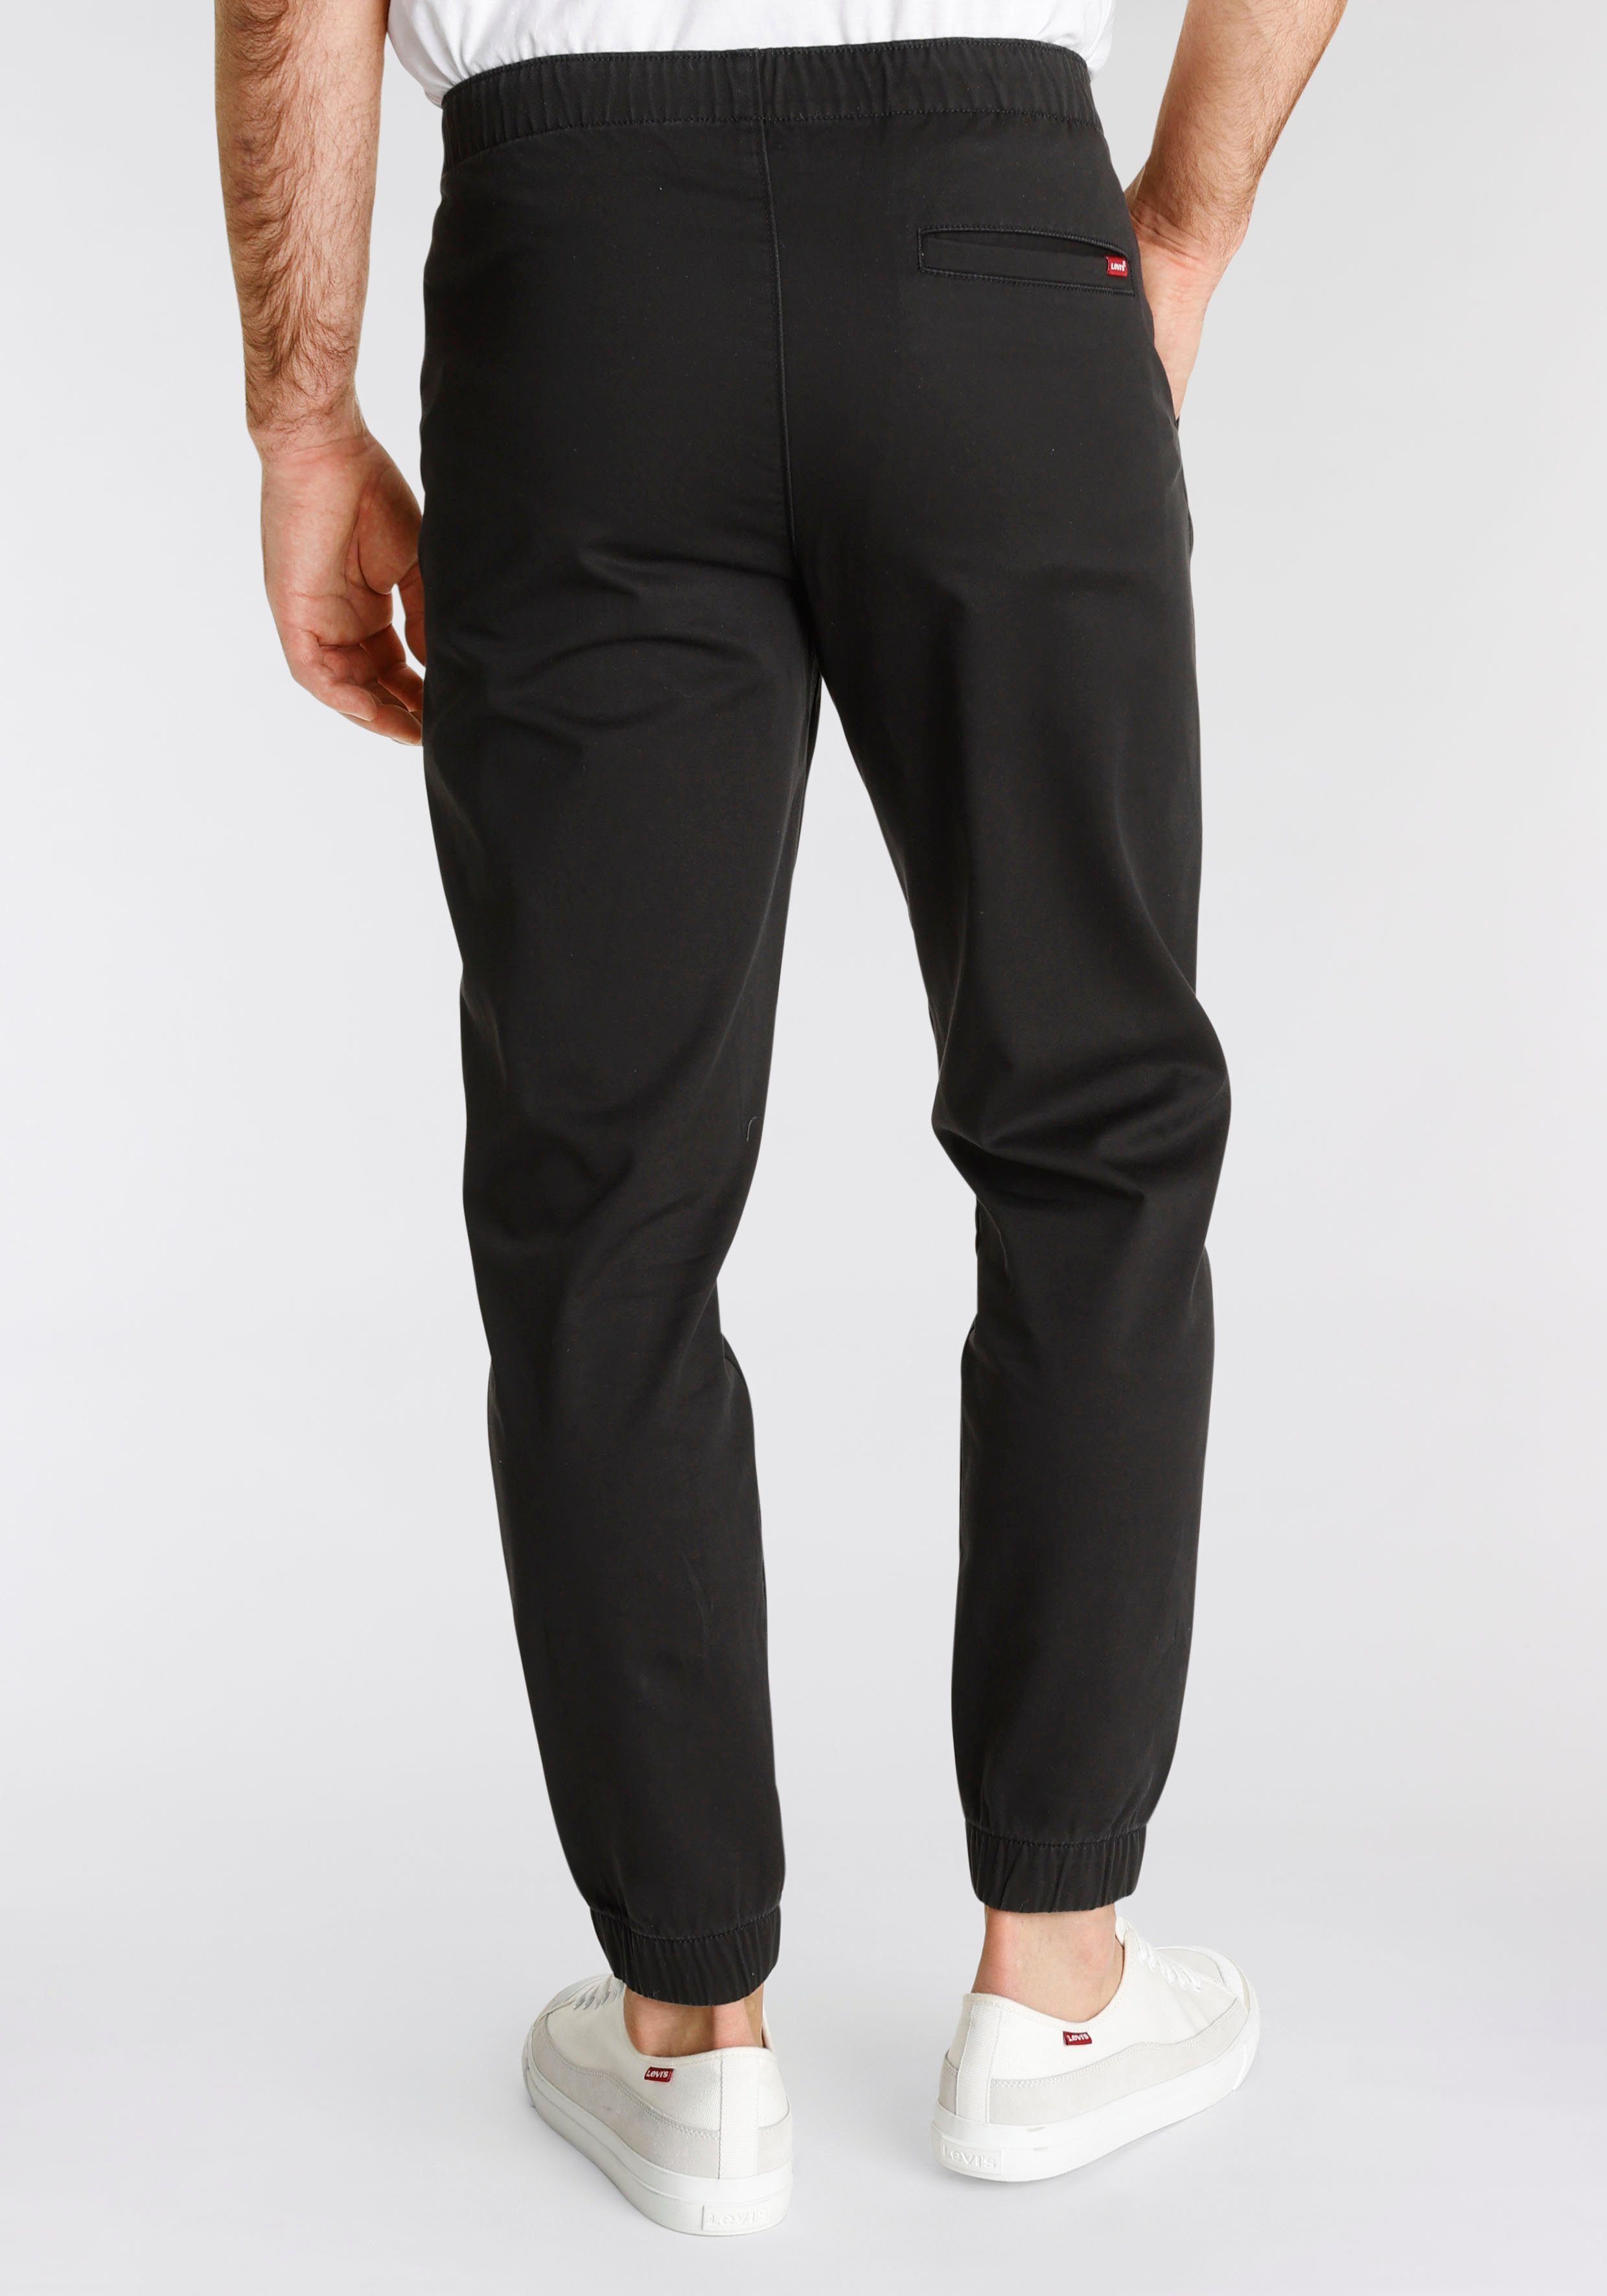 für LE Levi's® Styling Chinohose XX in Unifarbe schwarz III leichtes JOGGER CHINO